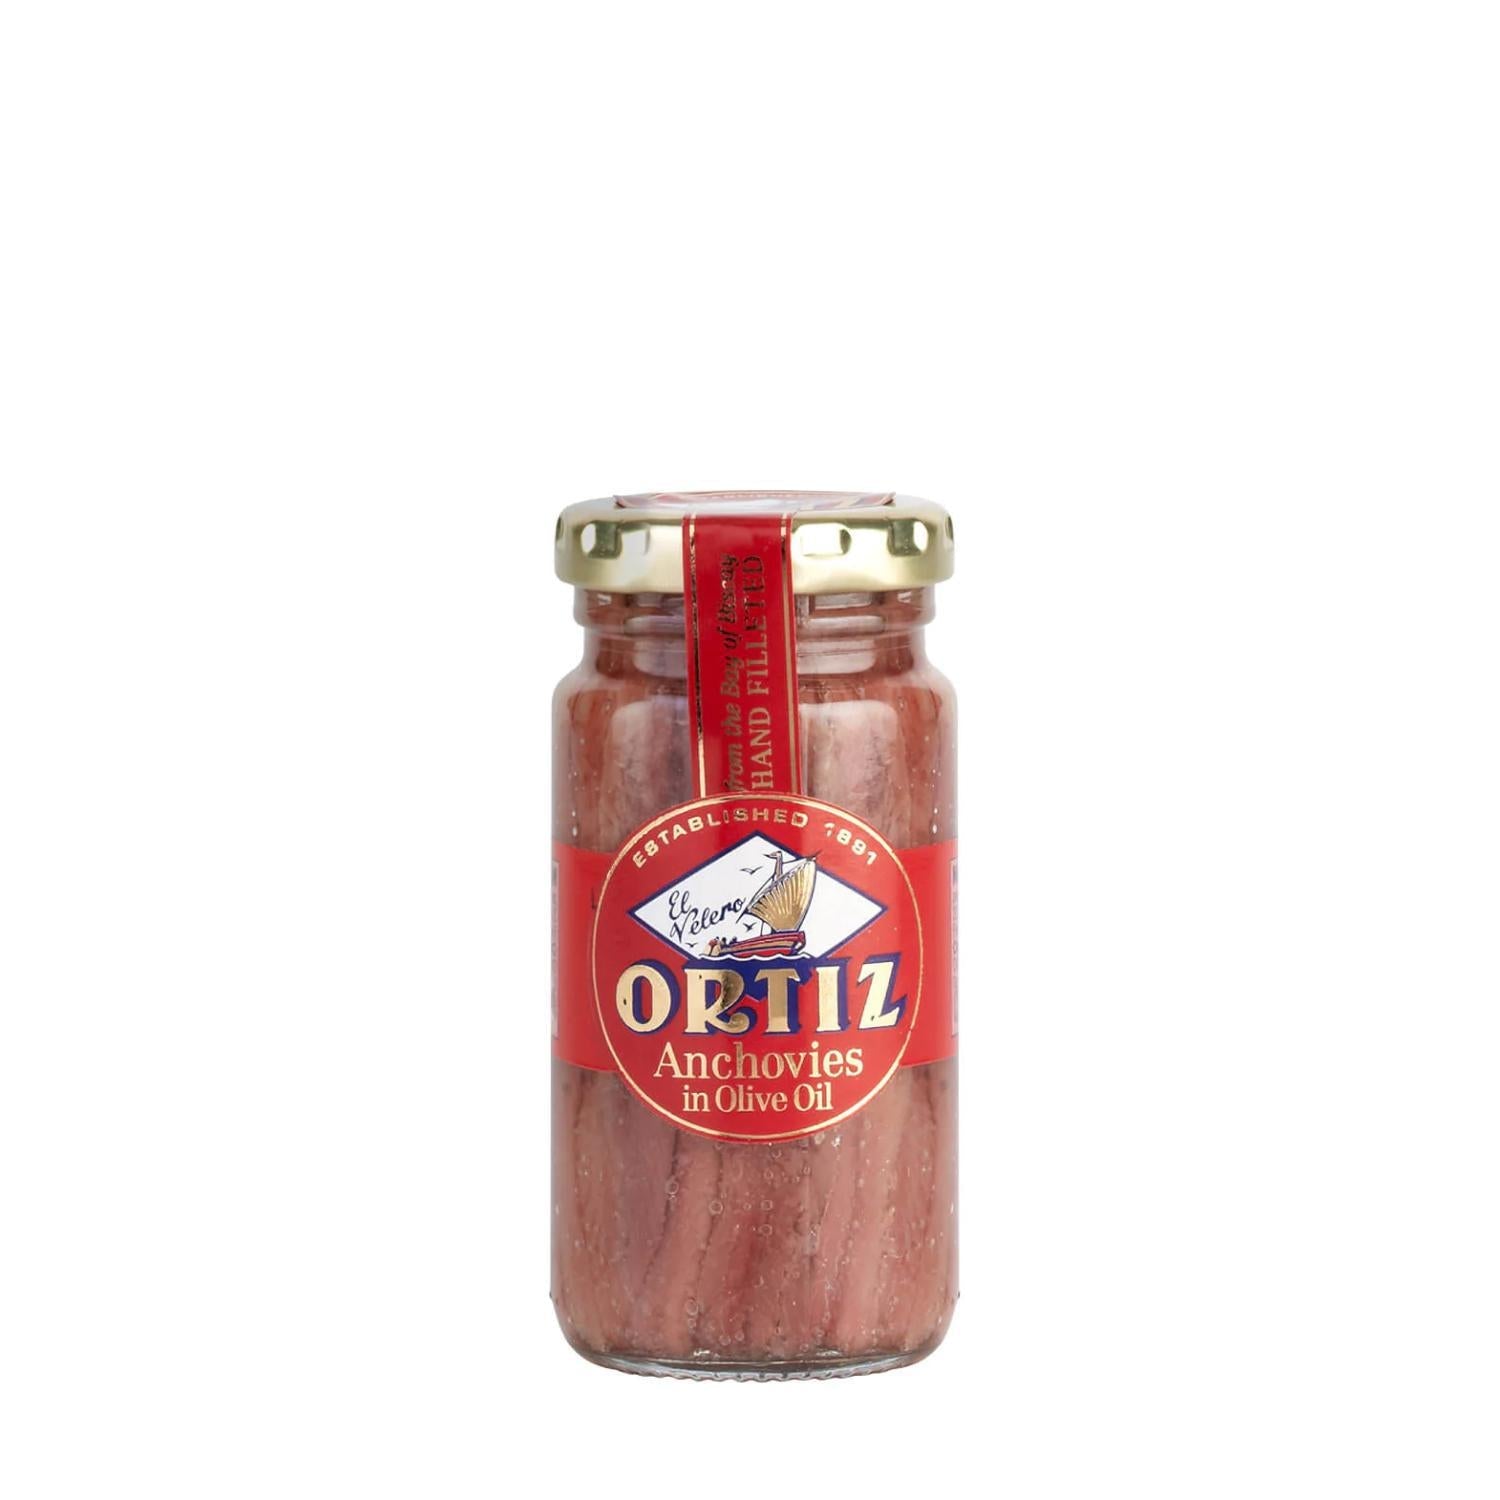 Ortiz - Anchovy Fillets